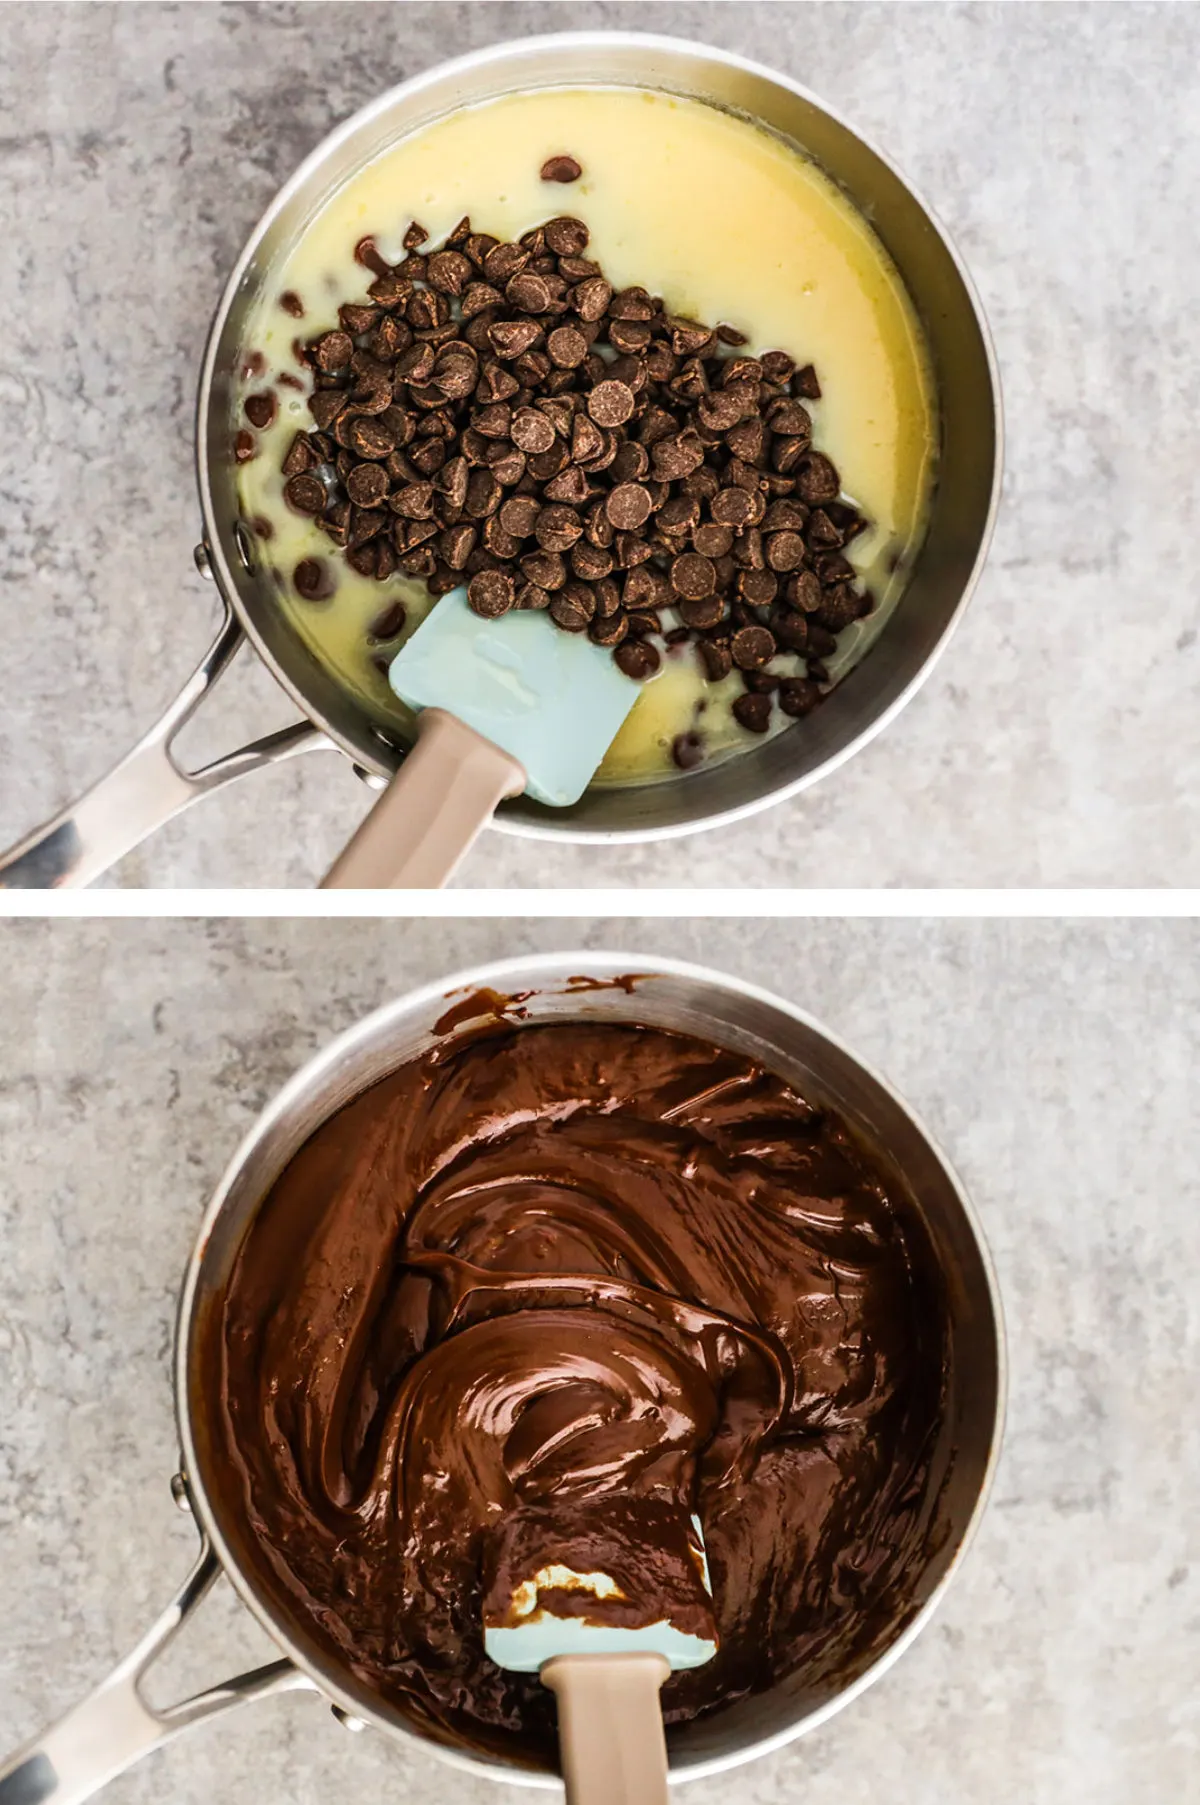 Two overhead images in one: 1. Chocolate chips are added to the milk and butter mixture. 2. Chocolate chips are melted into the mixture and stirred with a spatula. 